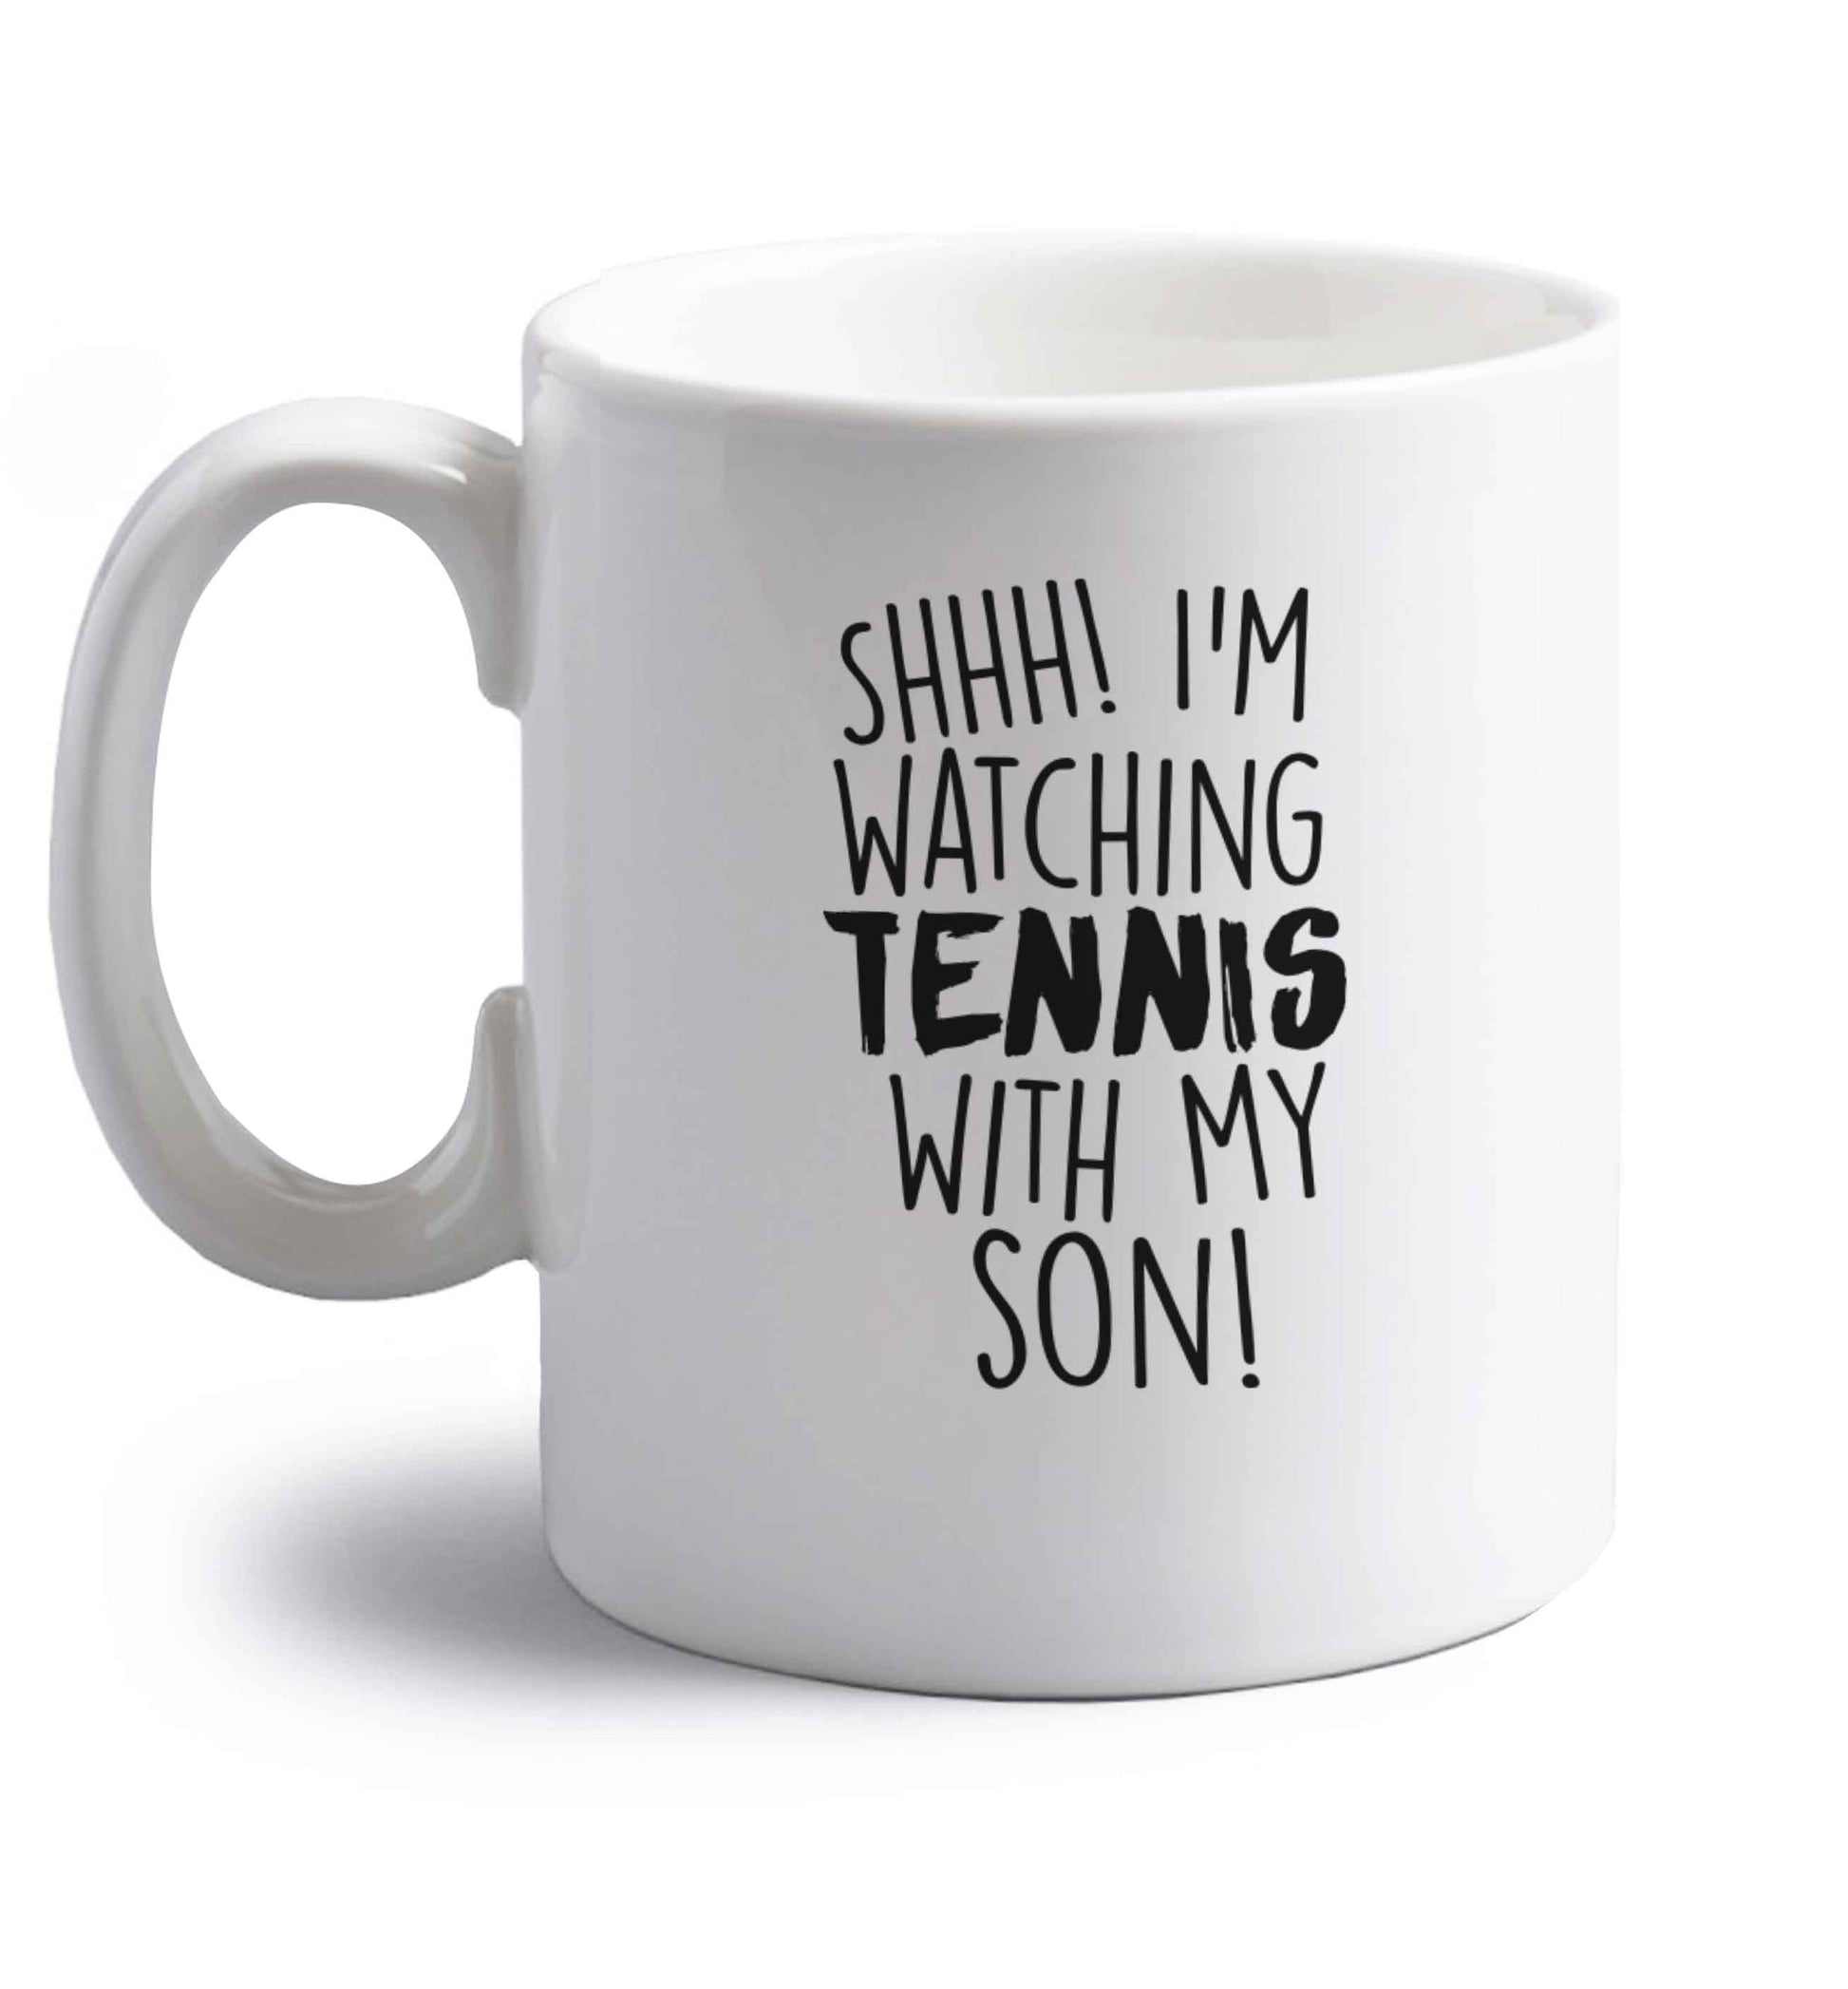 Shh! I'm watching tennis with my son! right handed white ceramic mug 